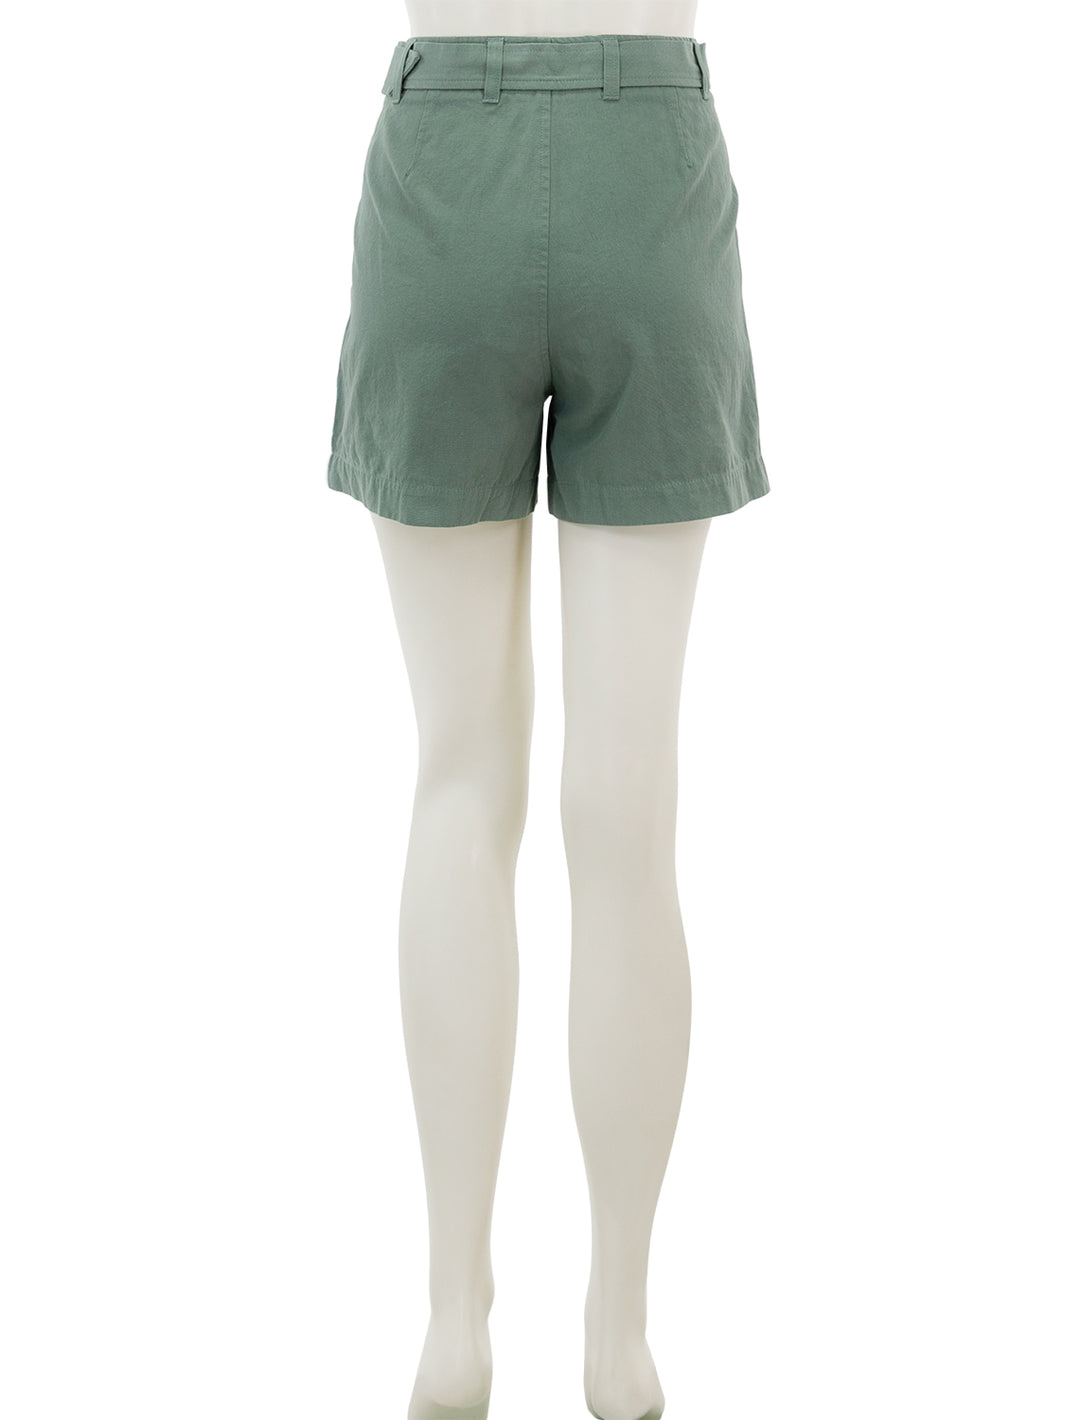 Back view of Lilla P.'s belted canvas shorts in seagrass.